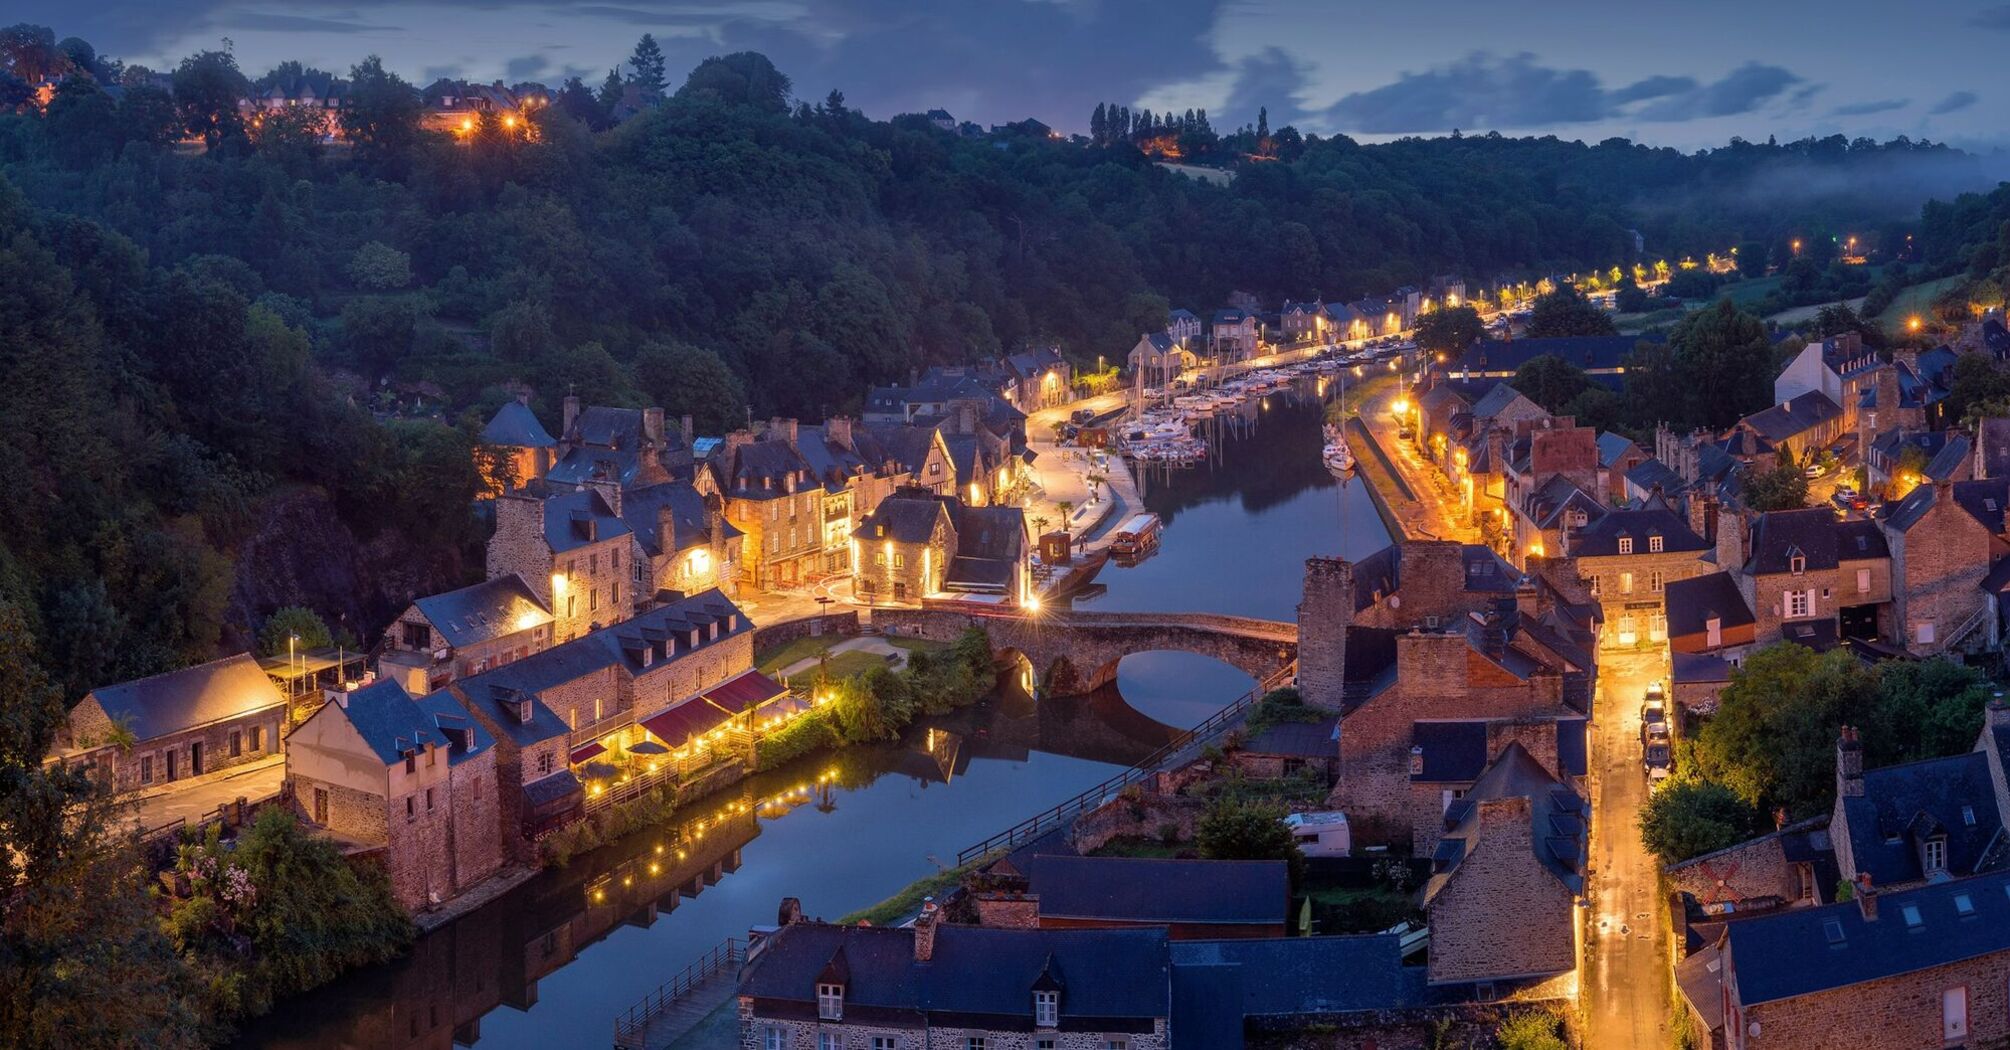 A picturesque evening view of a French village along a river, illuminated by street lights